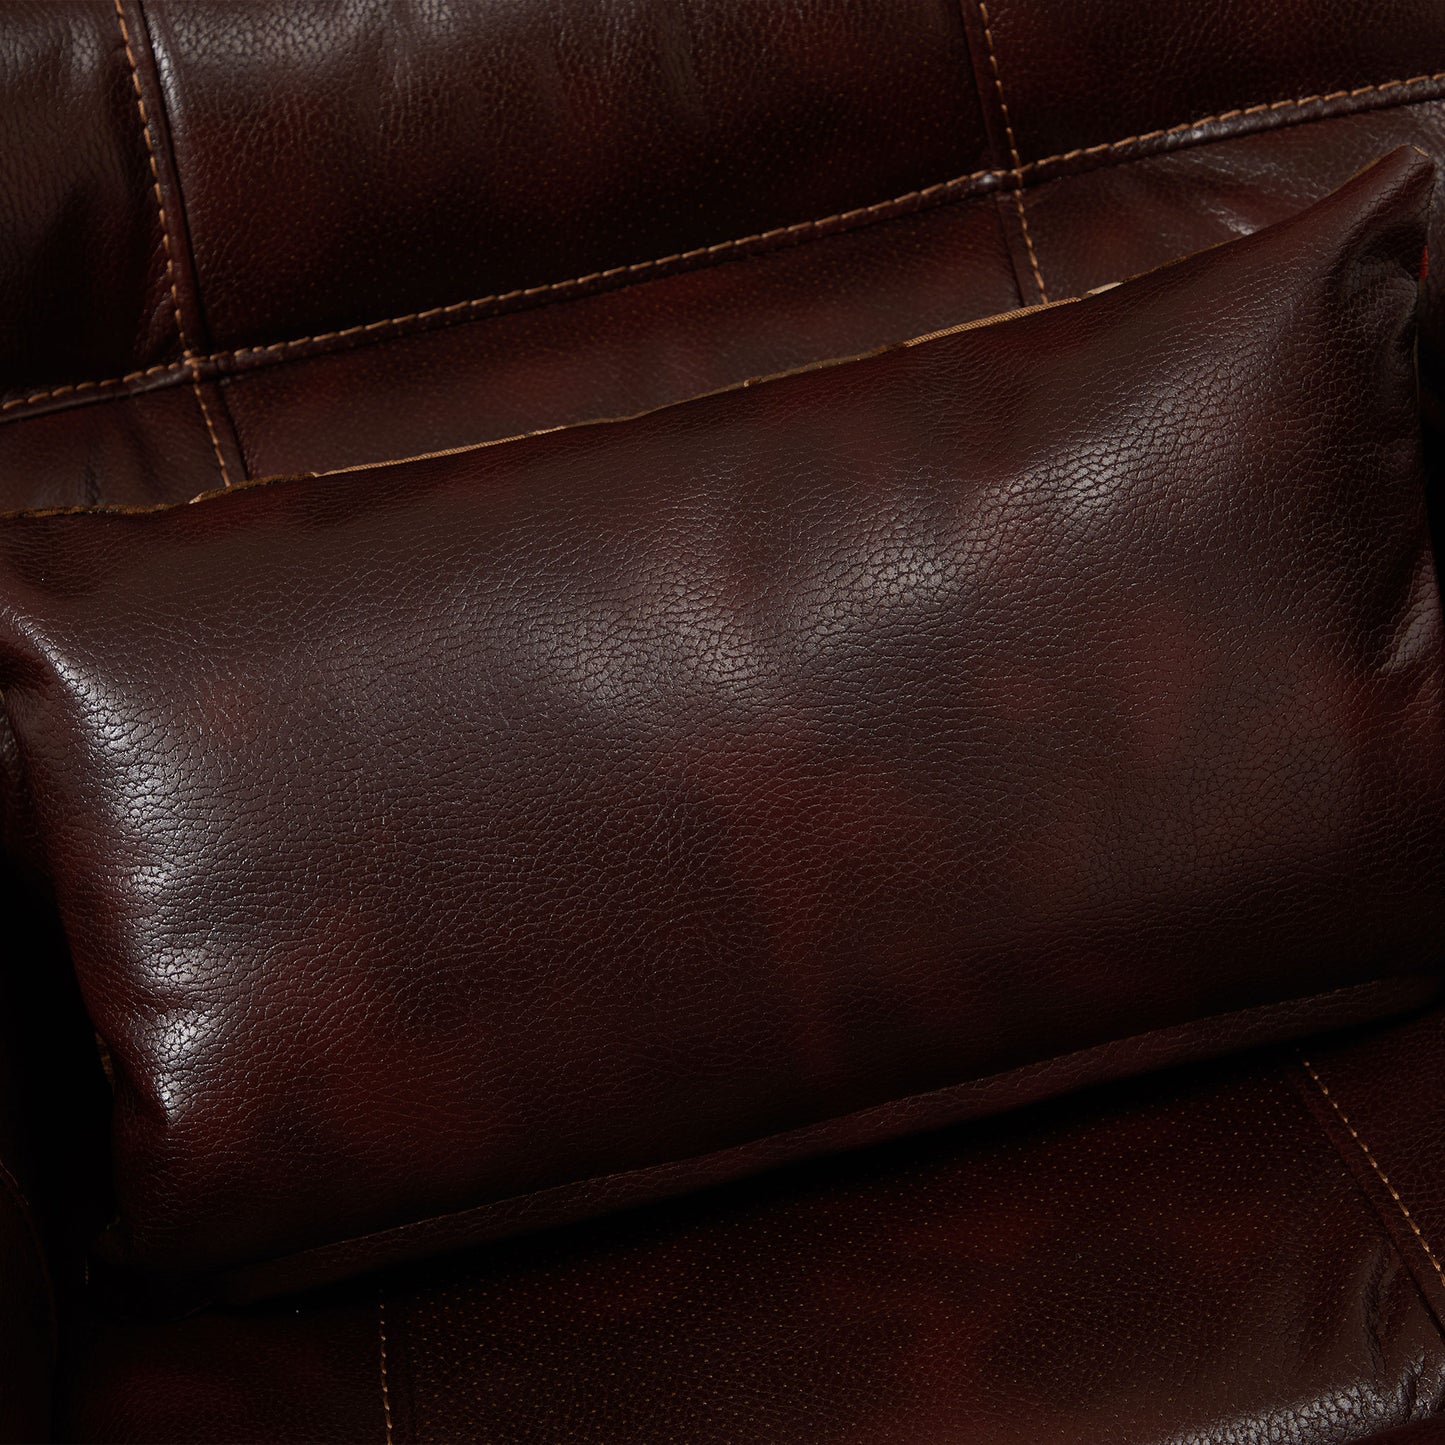 9206 Power Lift Lay Flat Recliner With Pull-Out Cup Holder(Large, Faux Leather Red Brown)